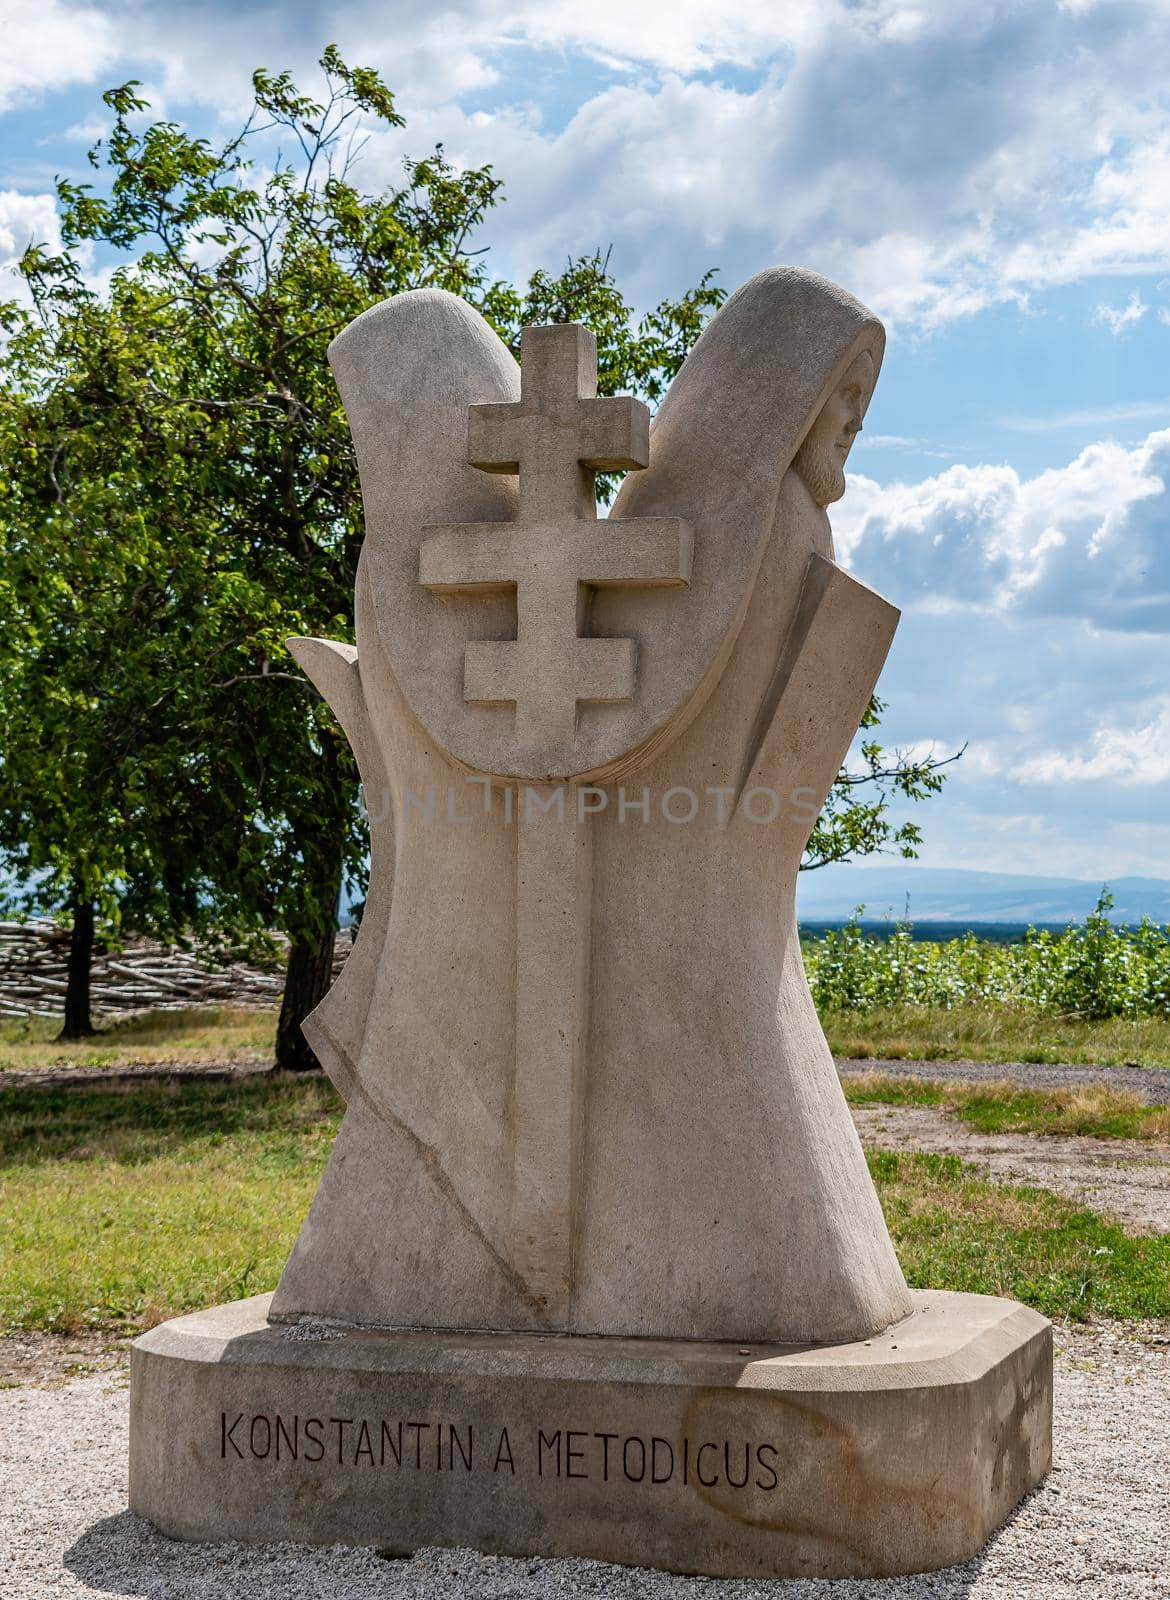 Ratiskovice, Czech Republic - July 7 - The mythical hill of Naklo near Ratiskovice Saints Cyril and Methodius with a double-armed cross at the pilgrimage site on Naklo hill near Ratiskovice